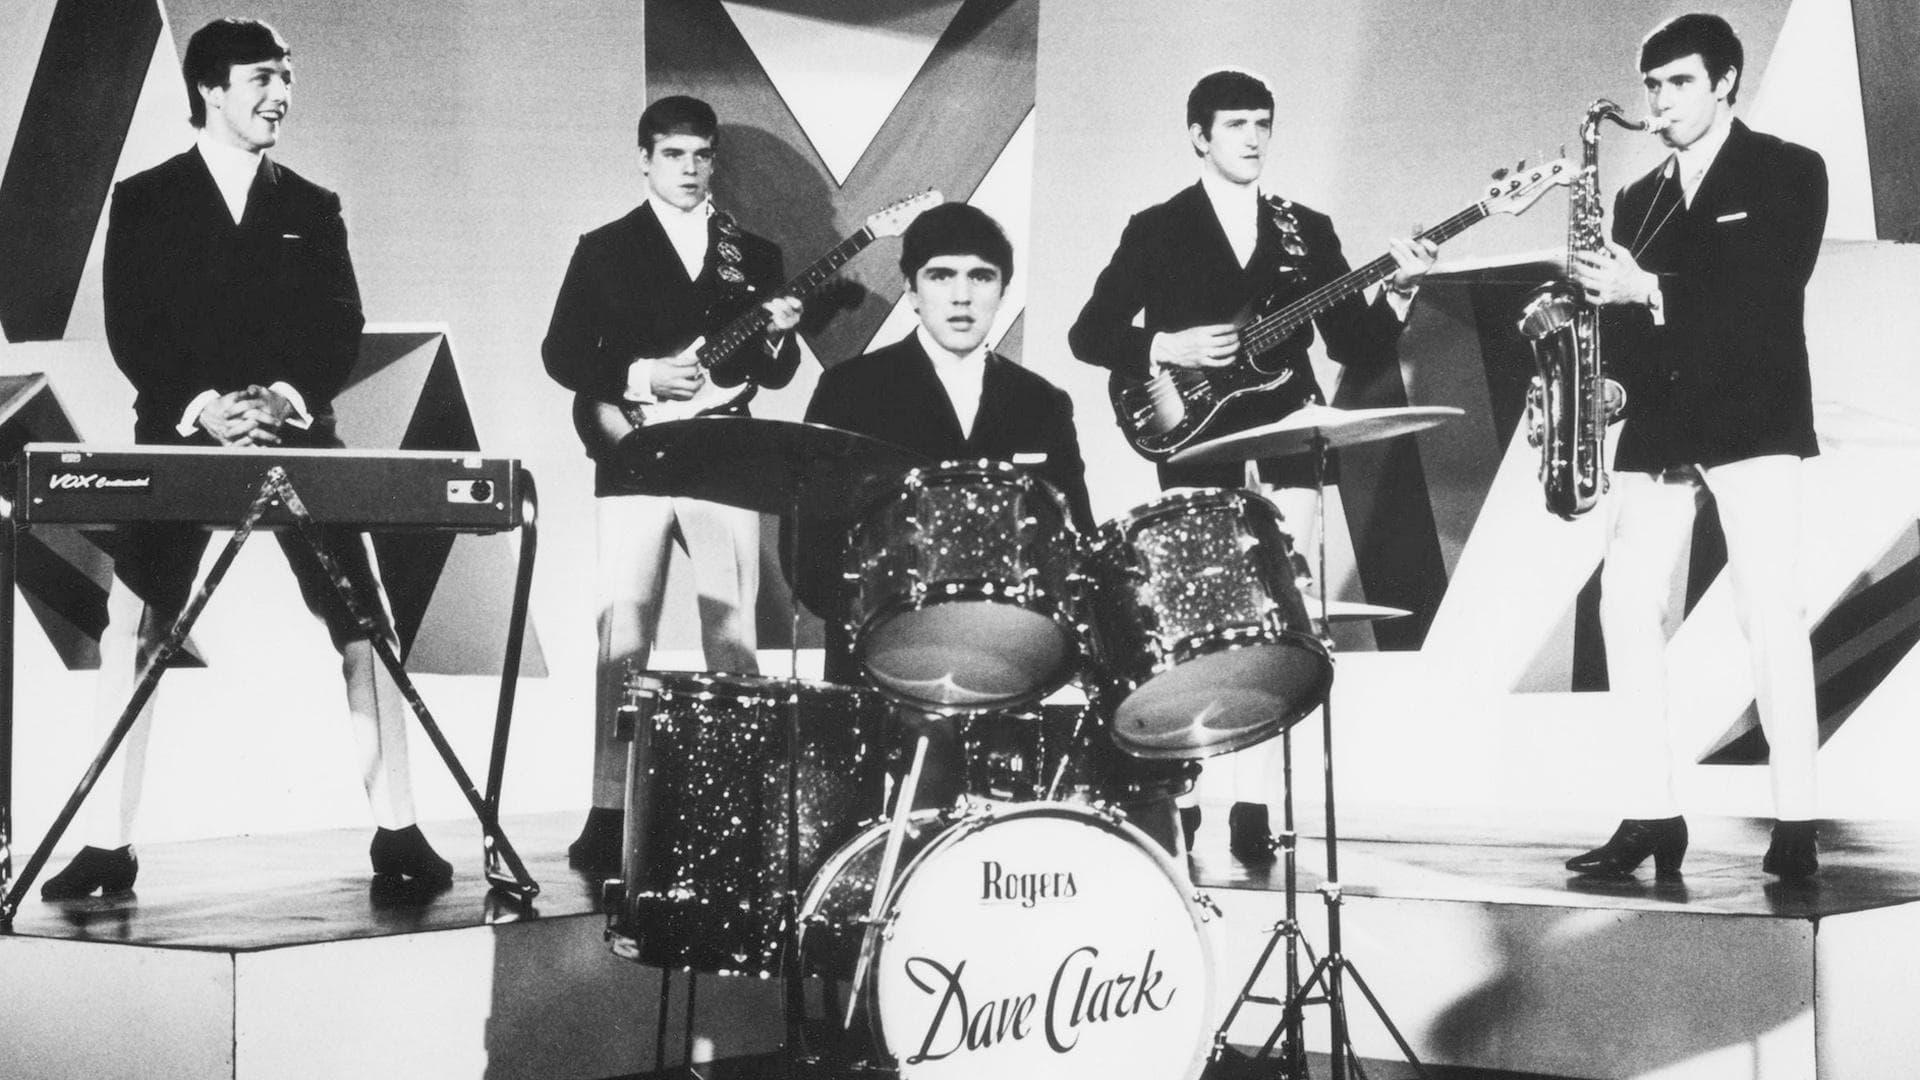 The Dave Clark Five and Beyond: Glad All Over backdrop